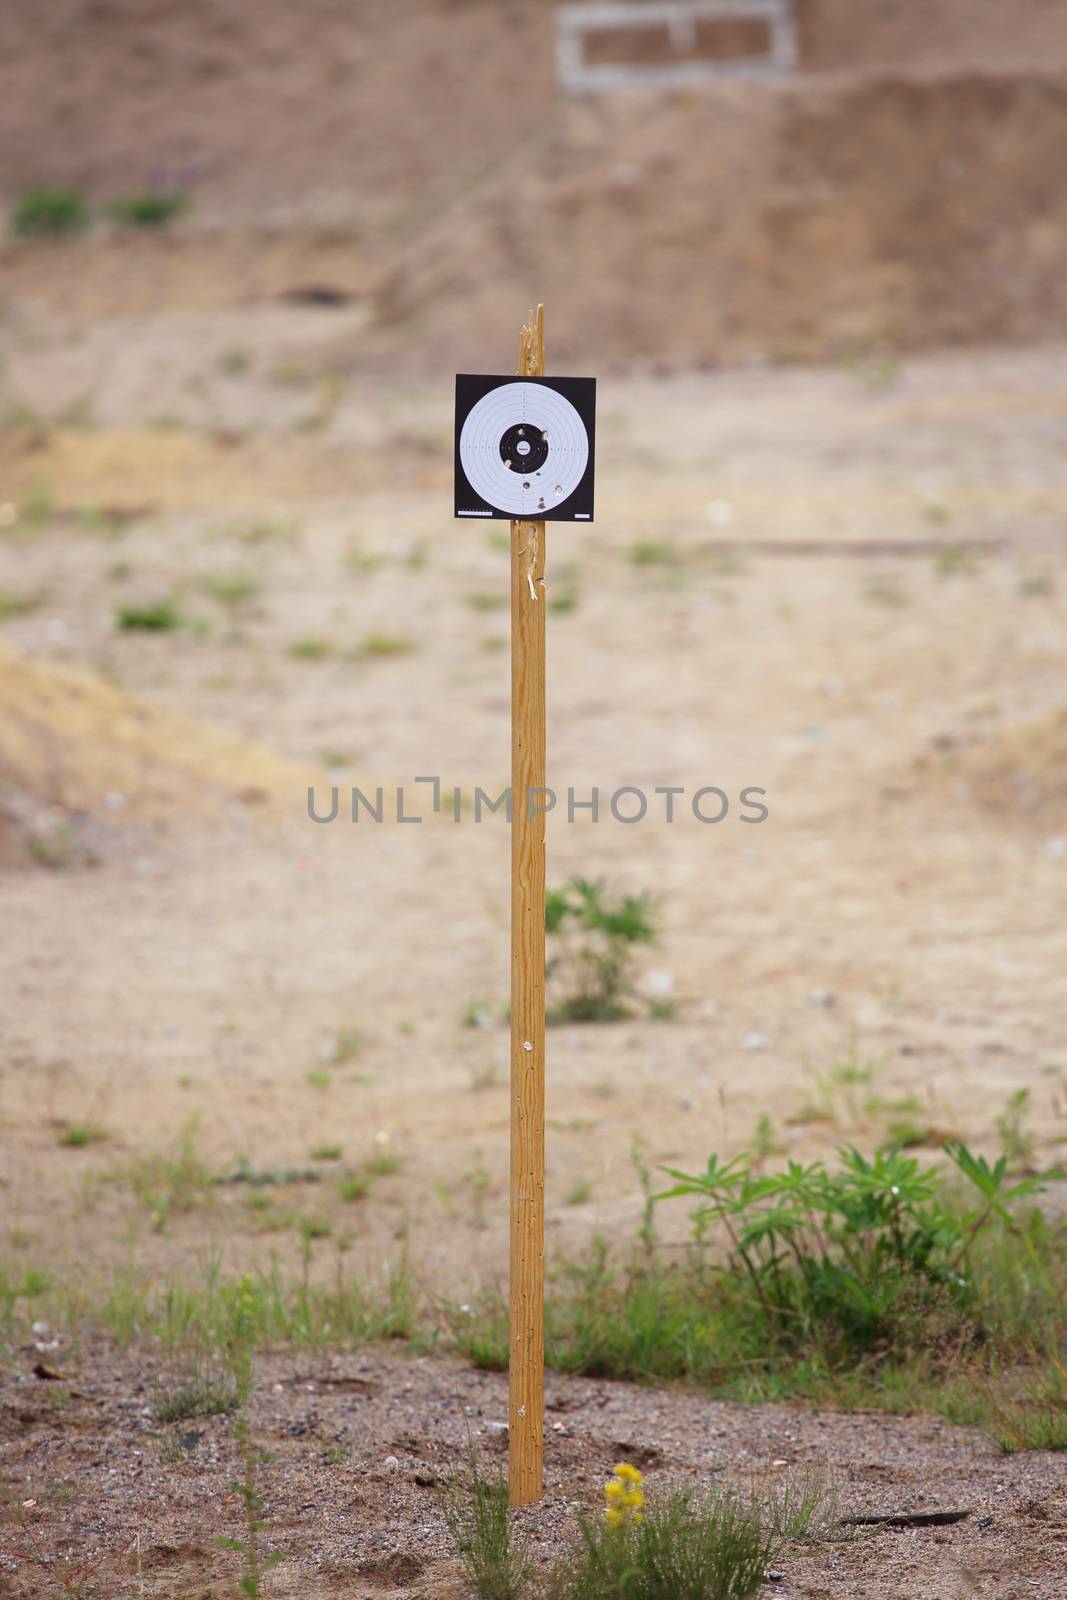 Targets on outdoor shooting range close up